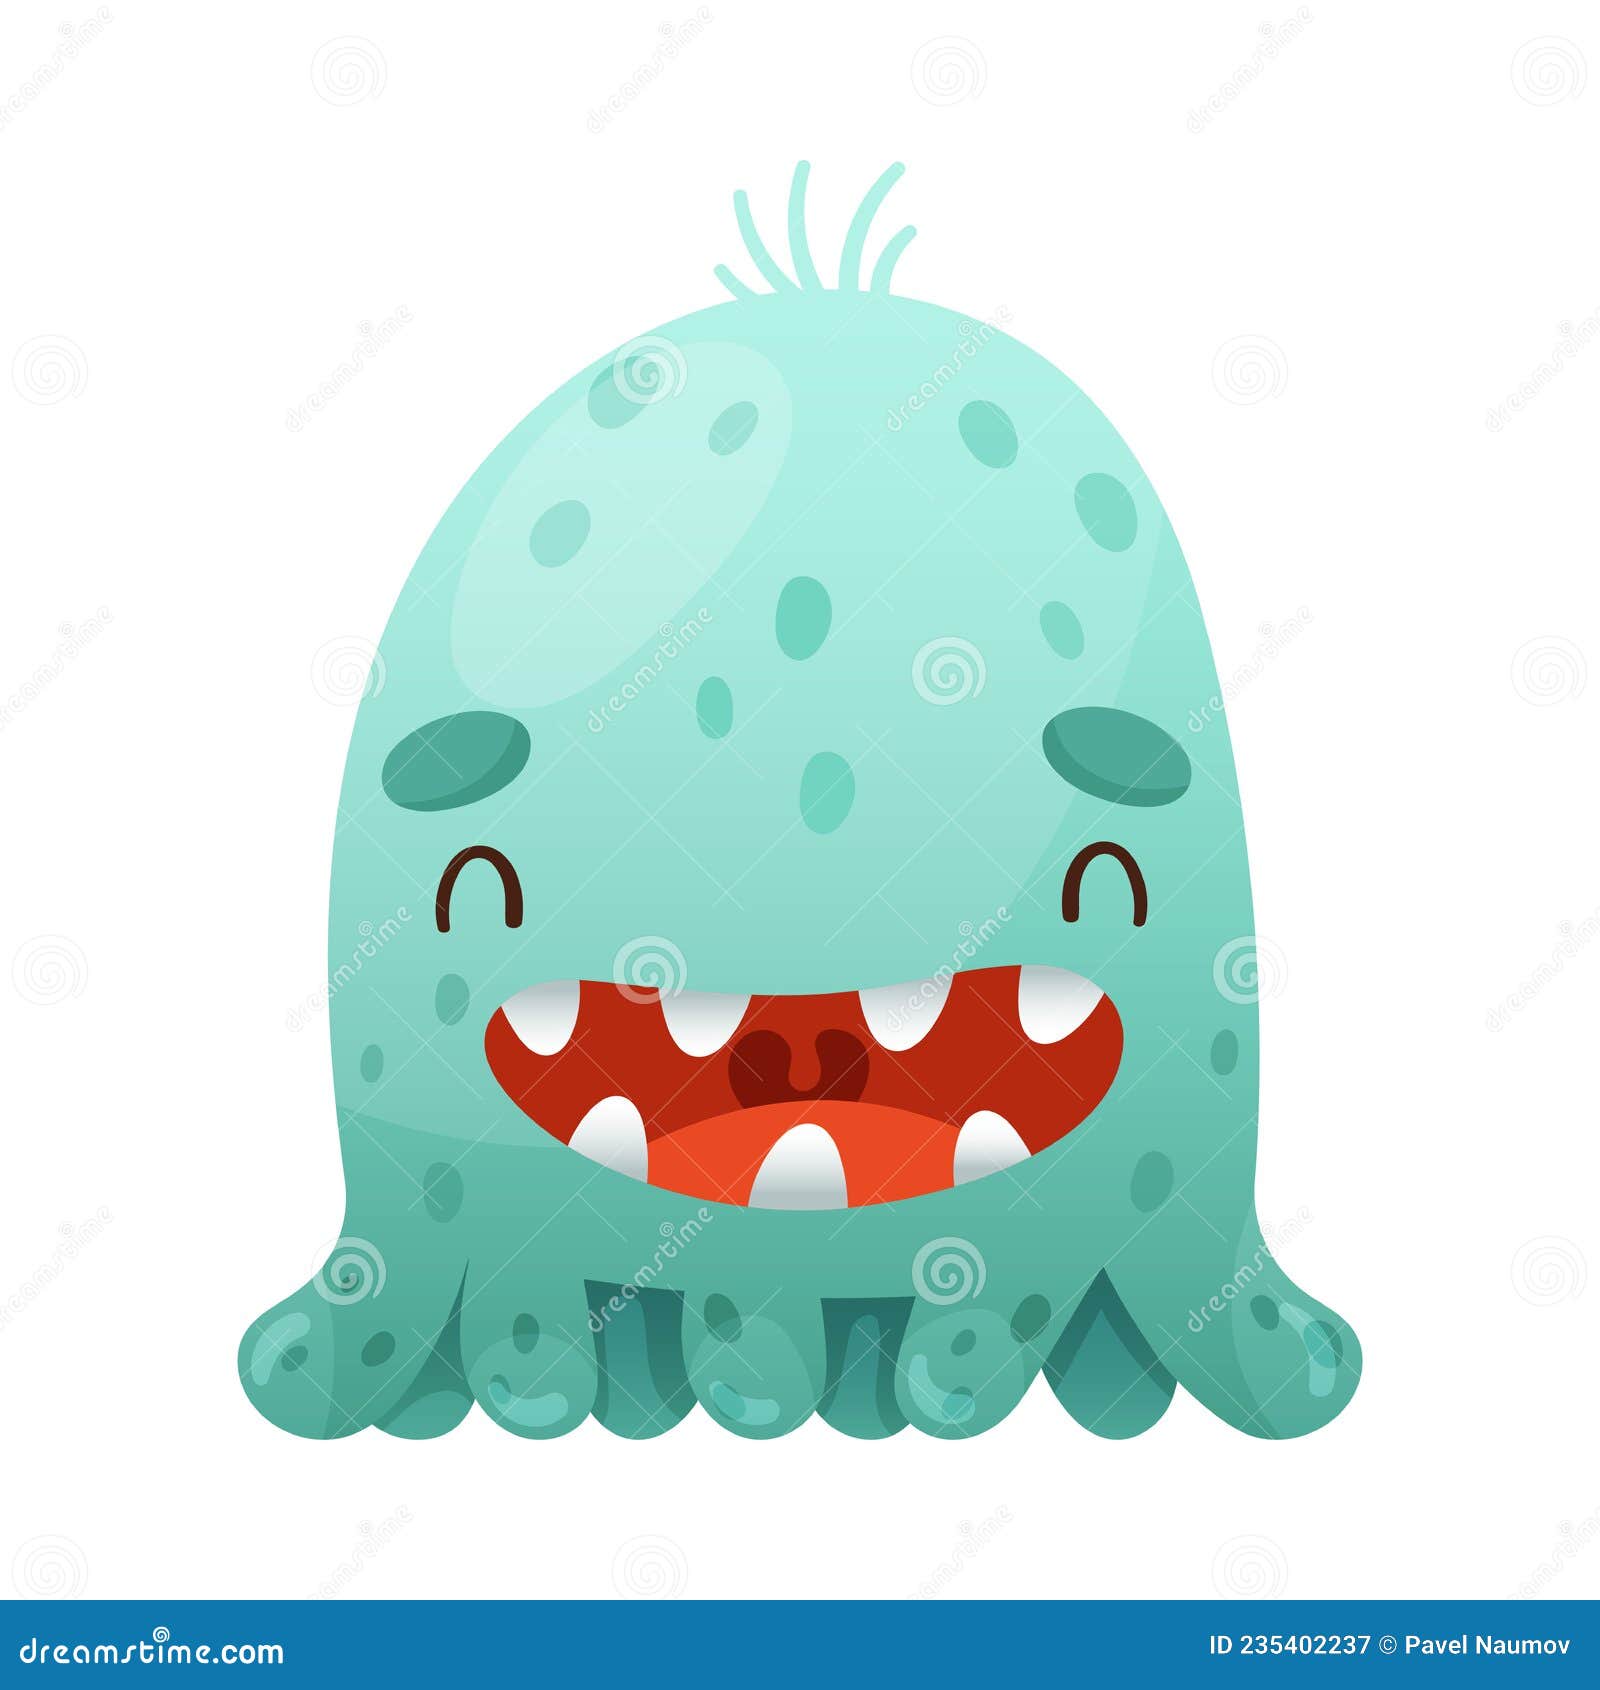 Cute Cartoon Monster Baby Character. Blue Smiling Toothy Alien with Funny  Face Vector Illustration Stock Vector - Illustration of design, happy:  235402237